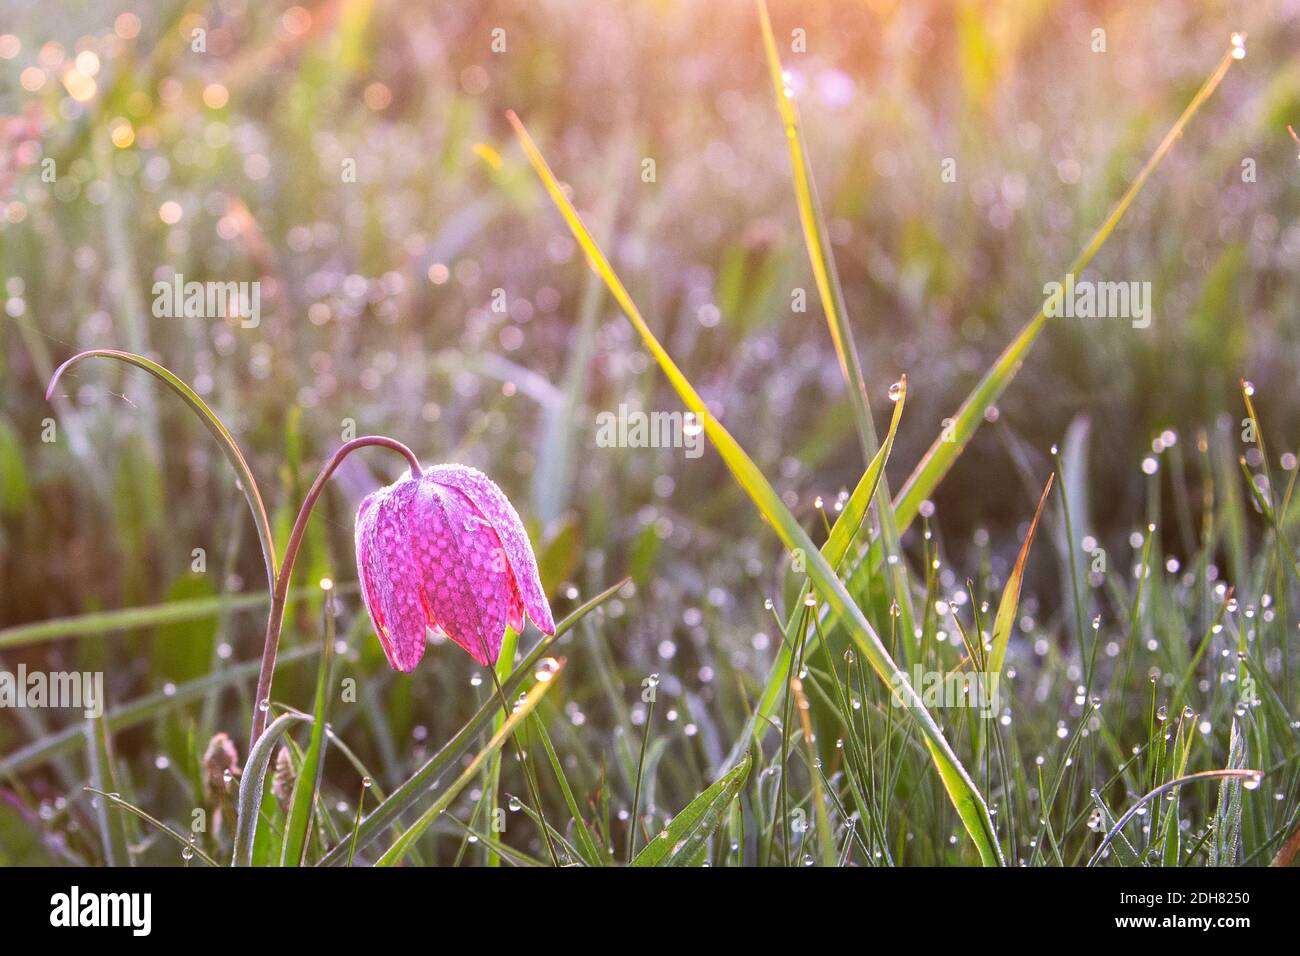 common fritillary, snake's-head fritillaria (Fritillaria meleagris), blooming in a wet meadow, Netherlands Stock Photo